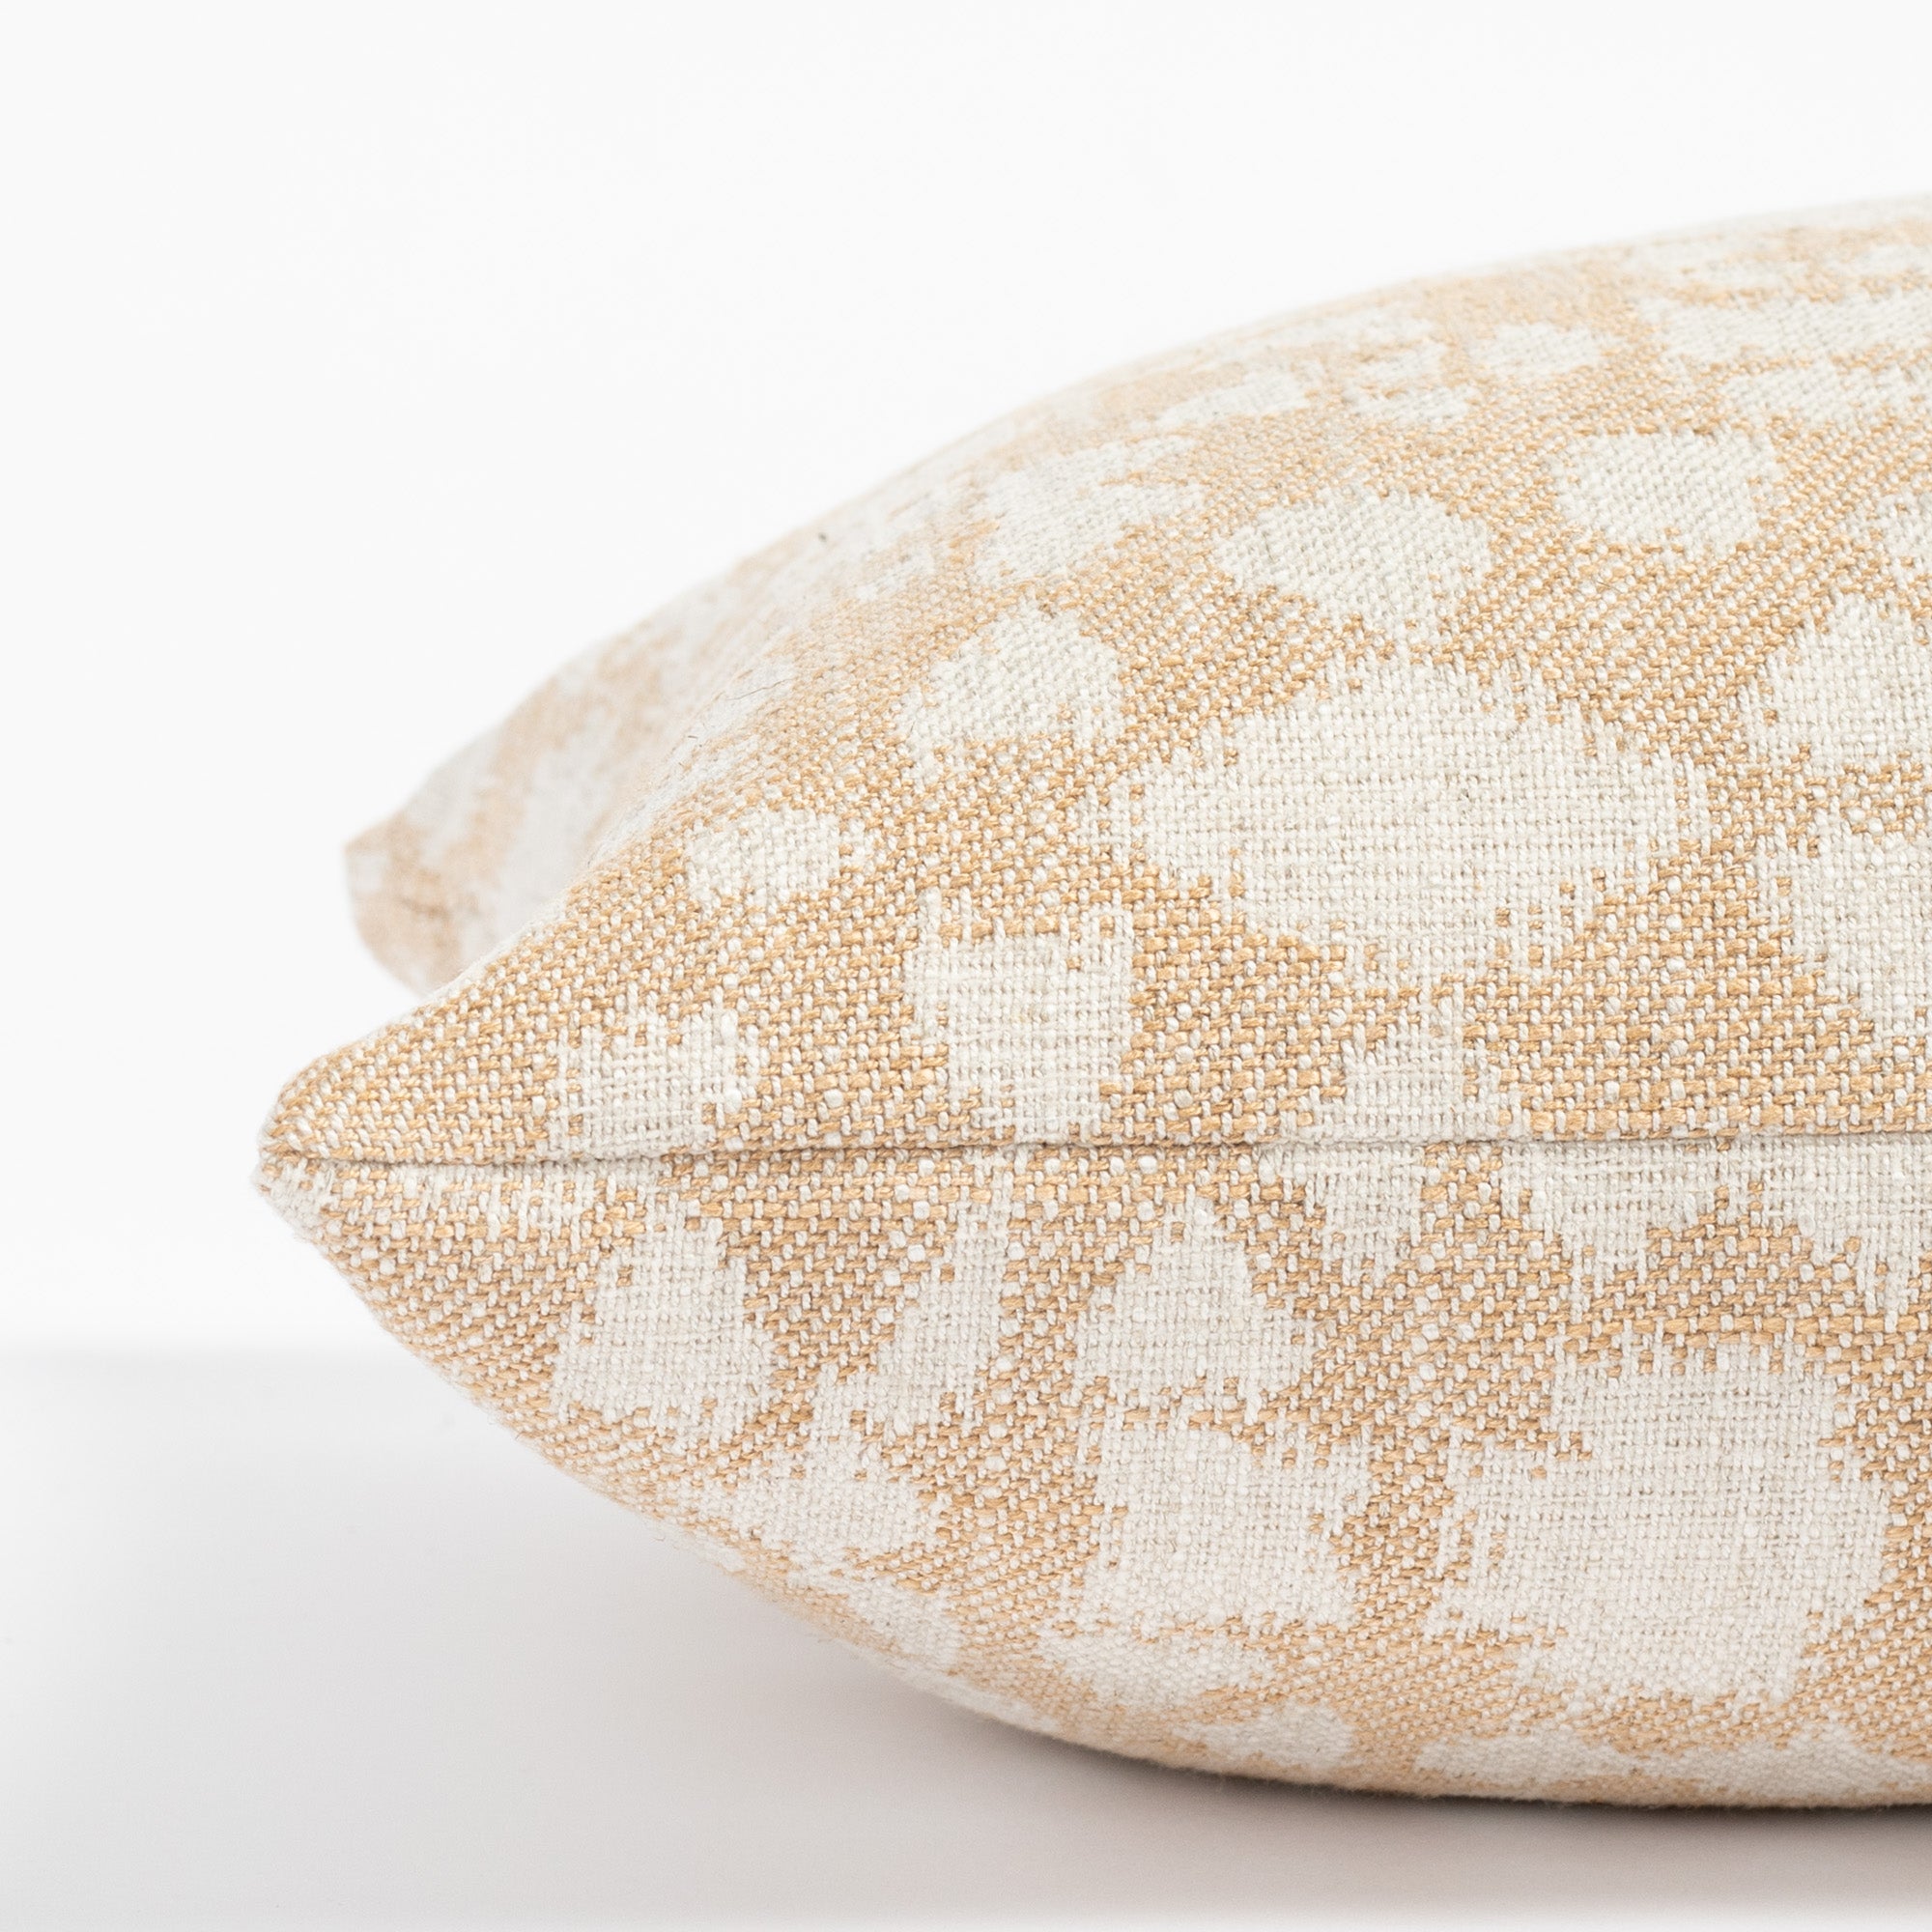 a soft gold and cream abstract floral patterned throw pillow : close up side view